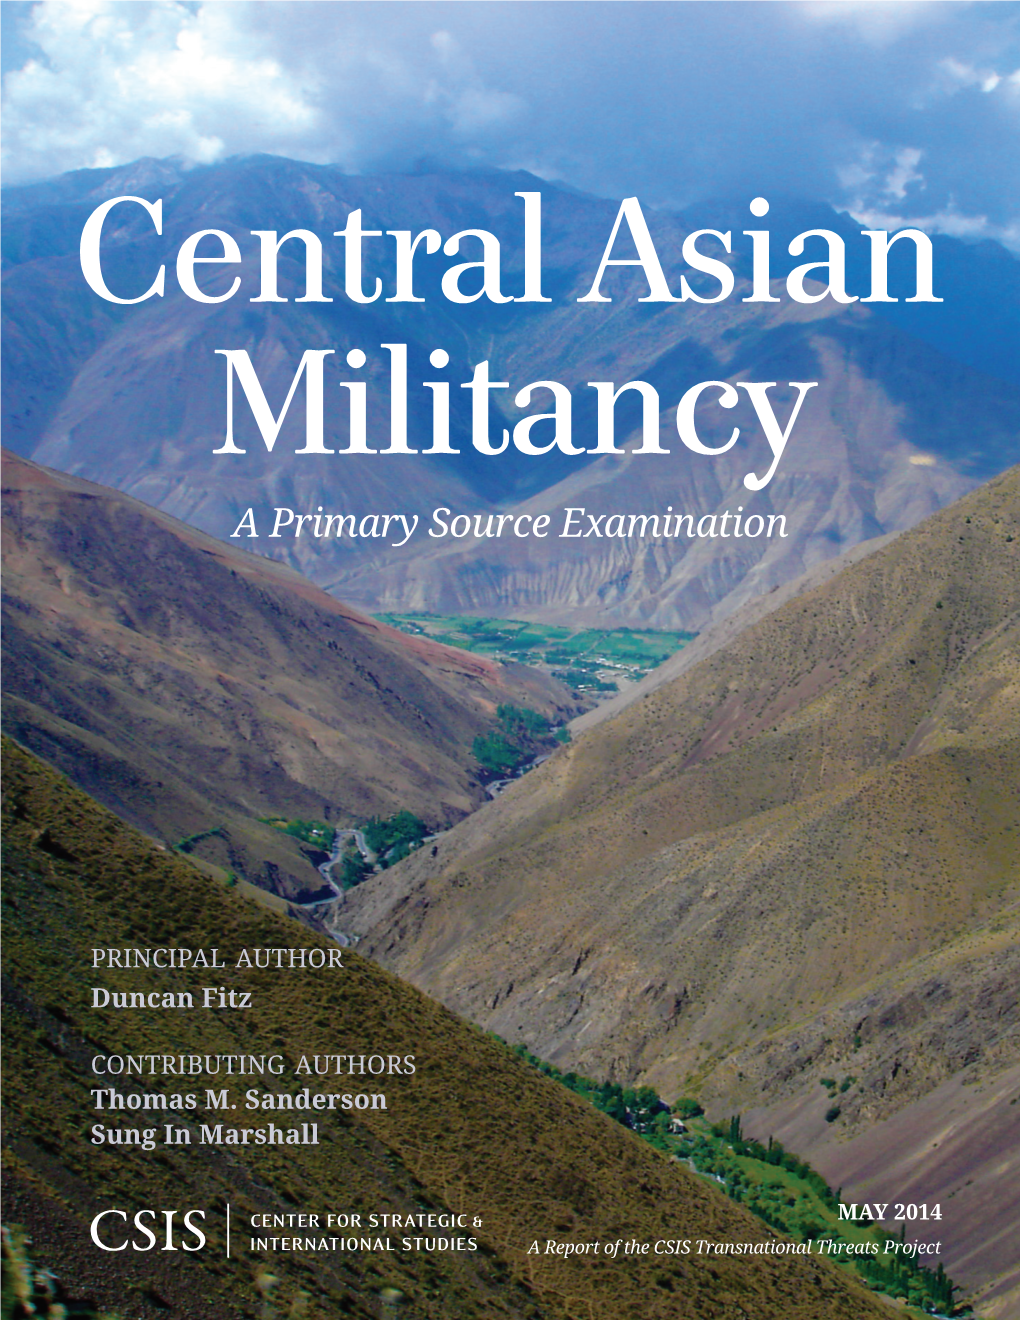 Central Asian Militancy: a Primary Source Examination